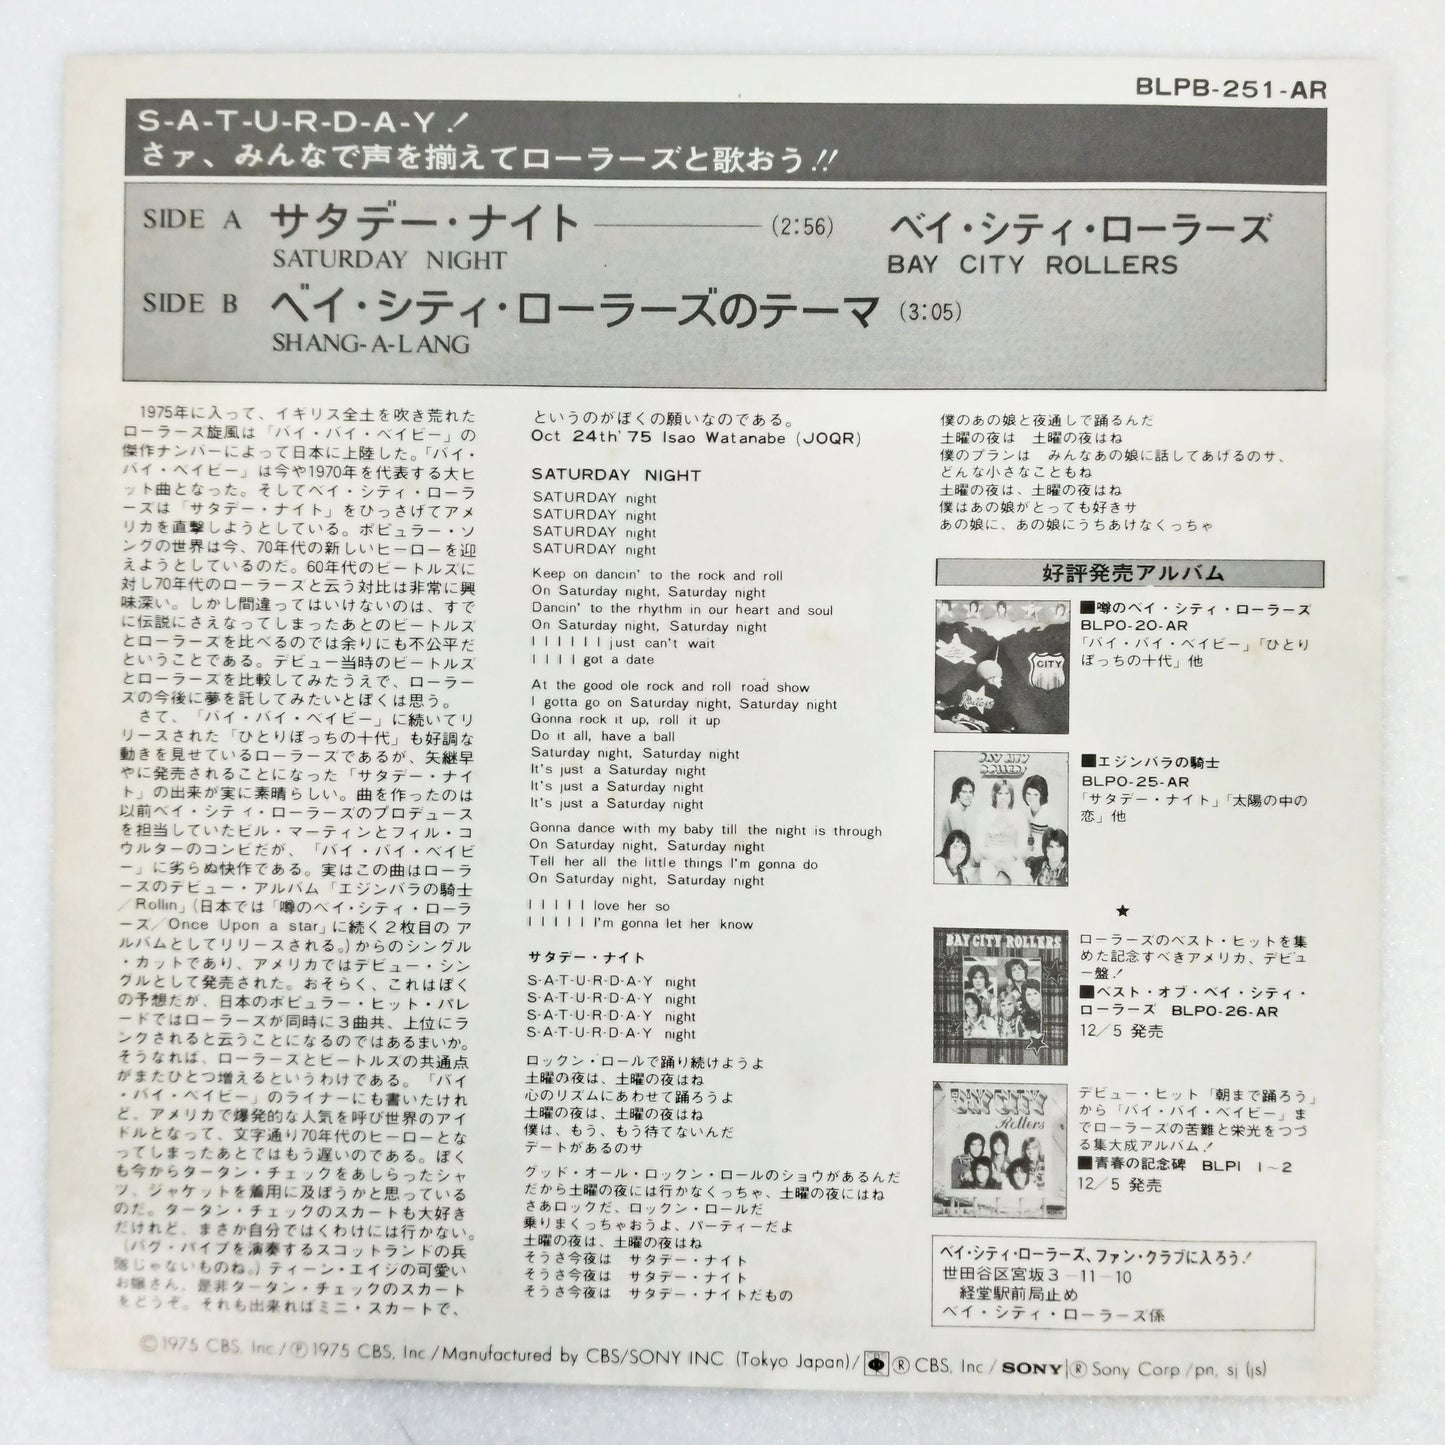 1975 Saturday Night Bay City Rollers Theme B: Bay City Rollers Japanese record vintage